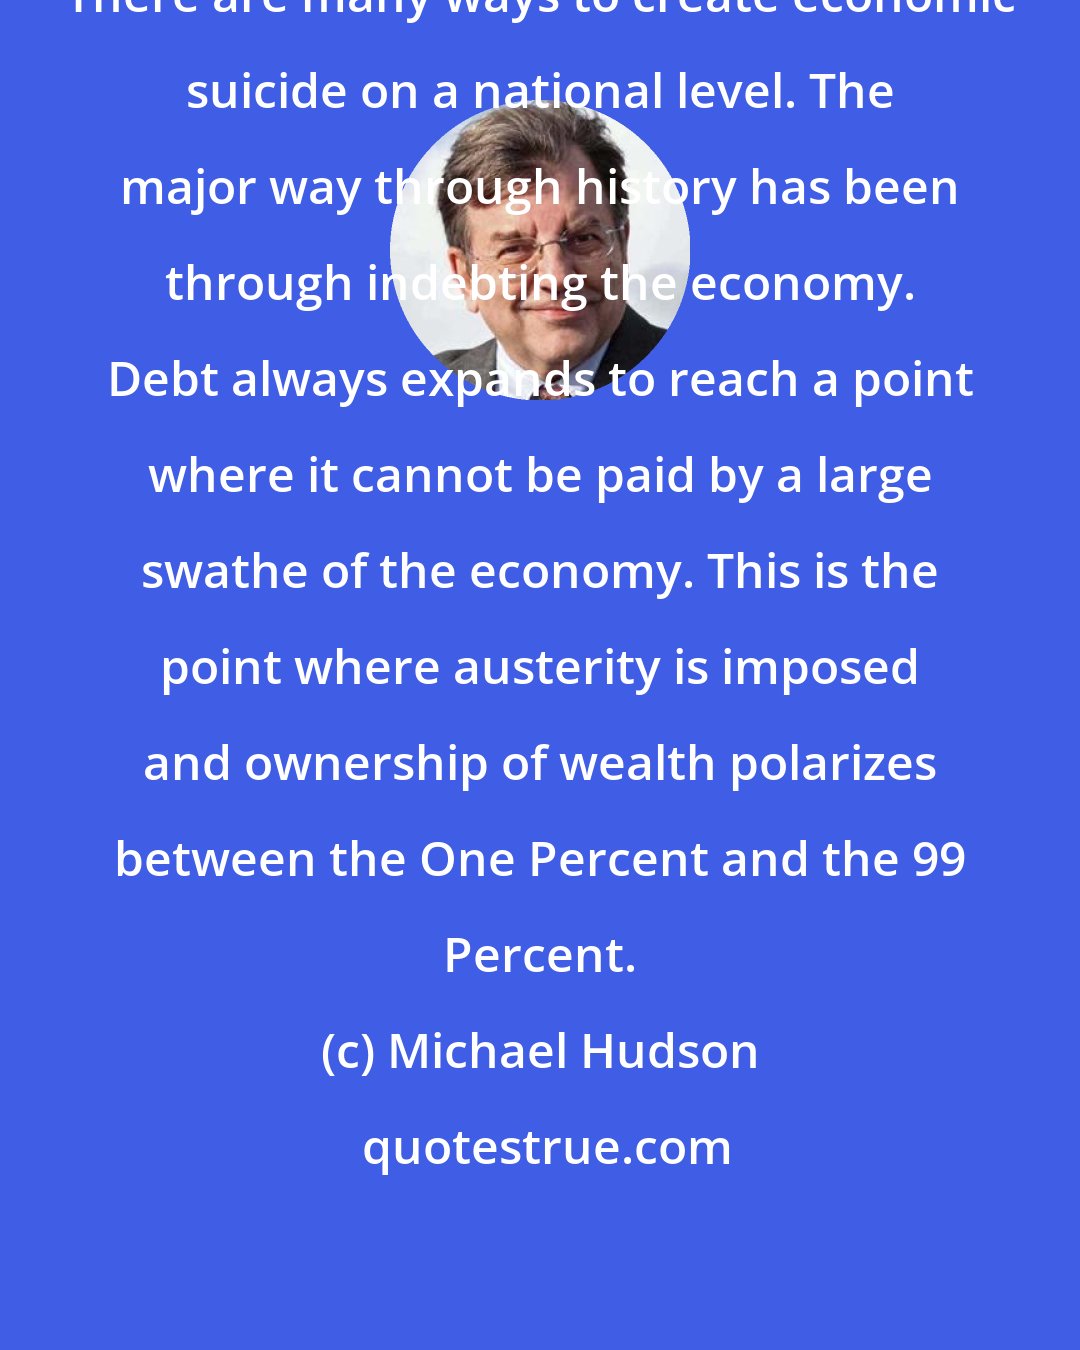 Michael Hudson: There are many ways to create economic suicide on a national level. The major way through history has been through indebting the economy. Debt always expands to reach a point where it cannot be paid by a large swathe of the economy. This is the point where austerity is imposed and ownership of wealth polarizes between the One Percent and the 99 Percent.